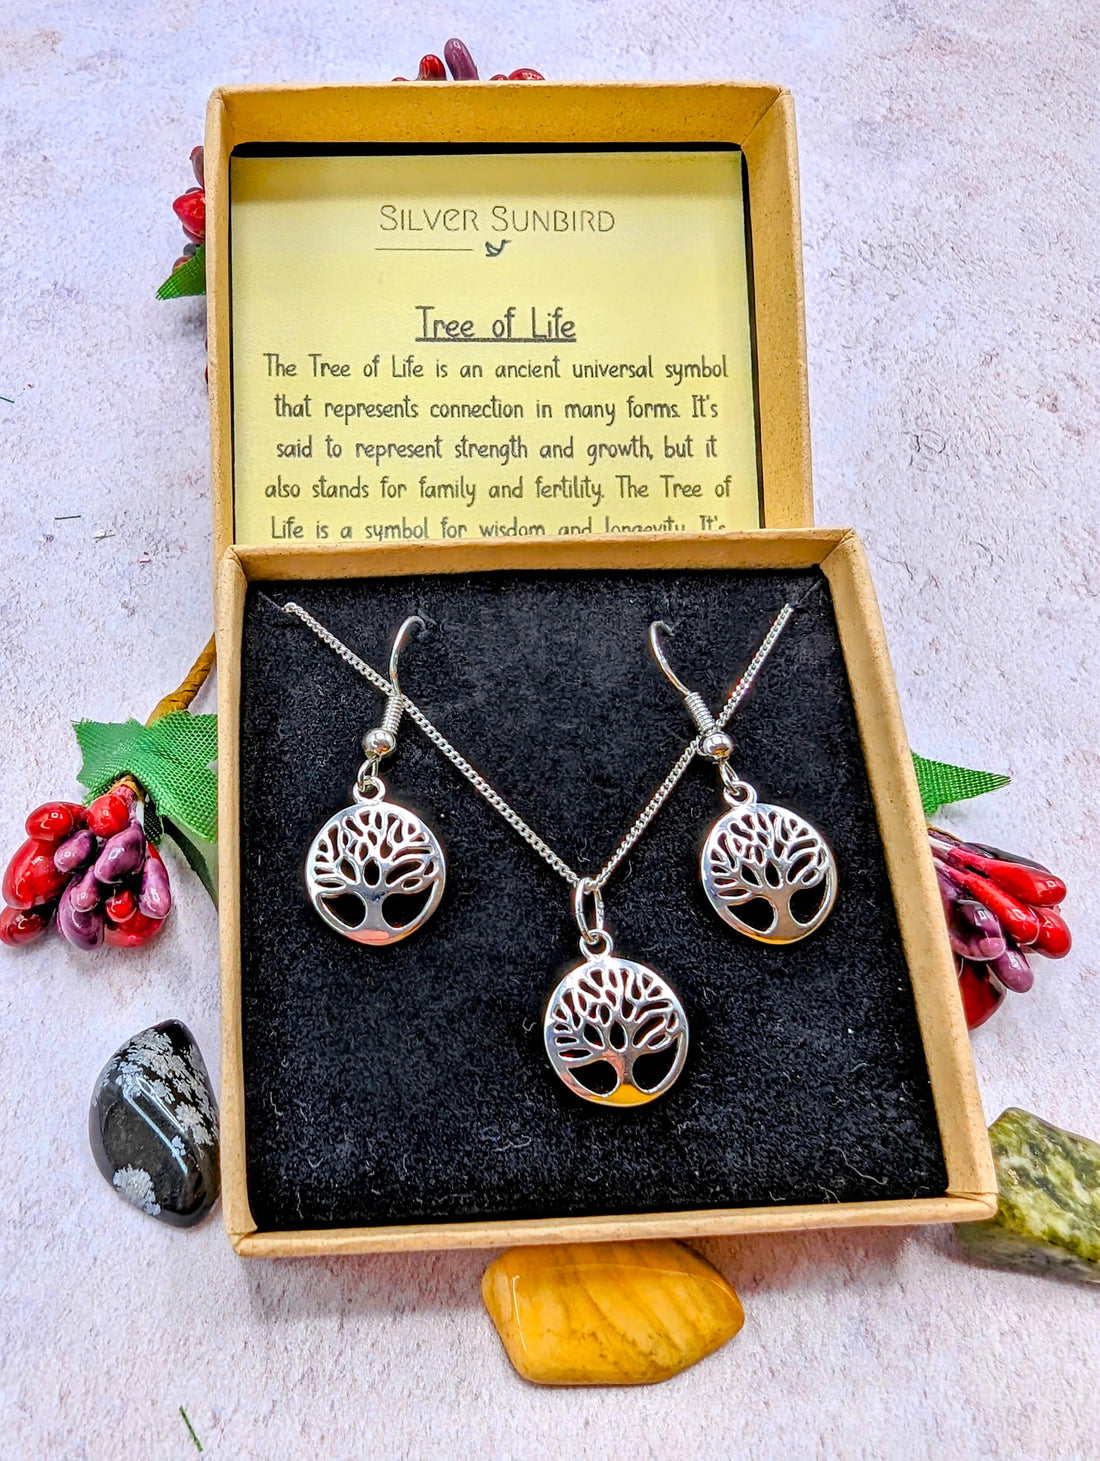 Sterling Silver Tree of Life Jewellery Set - Silver Sunbird Gift Sets